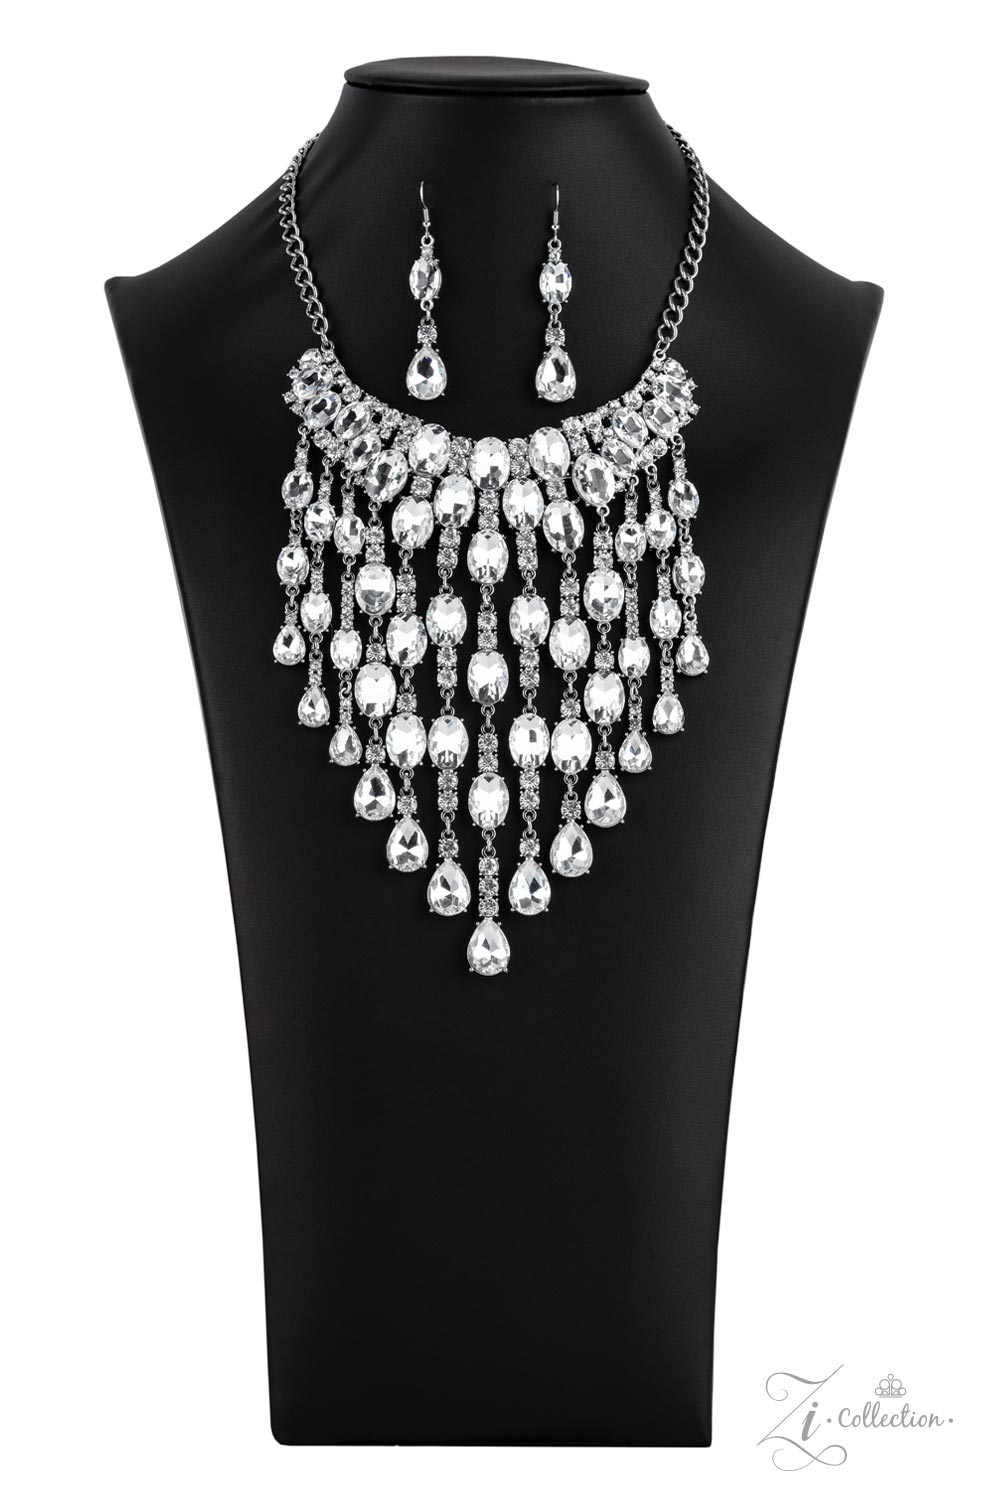 Majestic 2021 Zi Collection Necklace - Paparazzi Accessories  An intoxicating display of oversized oval and teardrop white gems dramatically drip below the collar. Enhanced with majestically mismatched white rhinestone fittings, the twinkly tassels cascade from the bottom of overloaded rhinestone encrusted silver frames that attach to a classic silver chain for the ultimate statement-making finish. Features an adjustable clasp closure. Includes one pair of matching earrings.